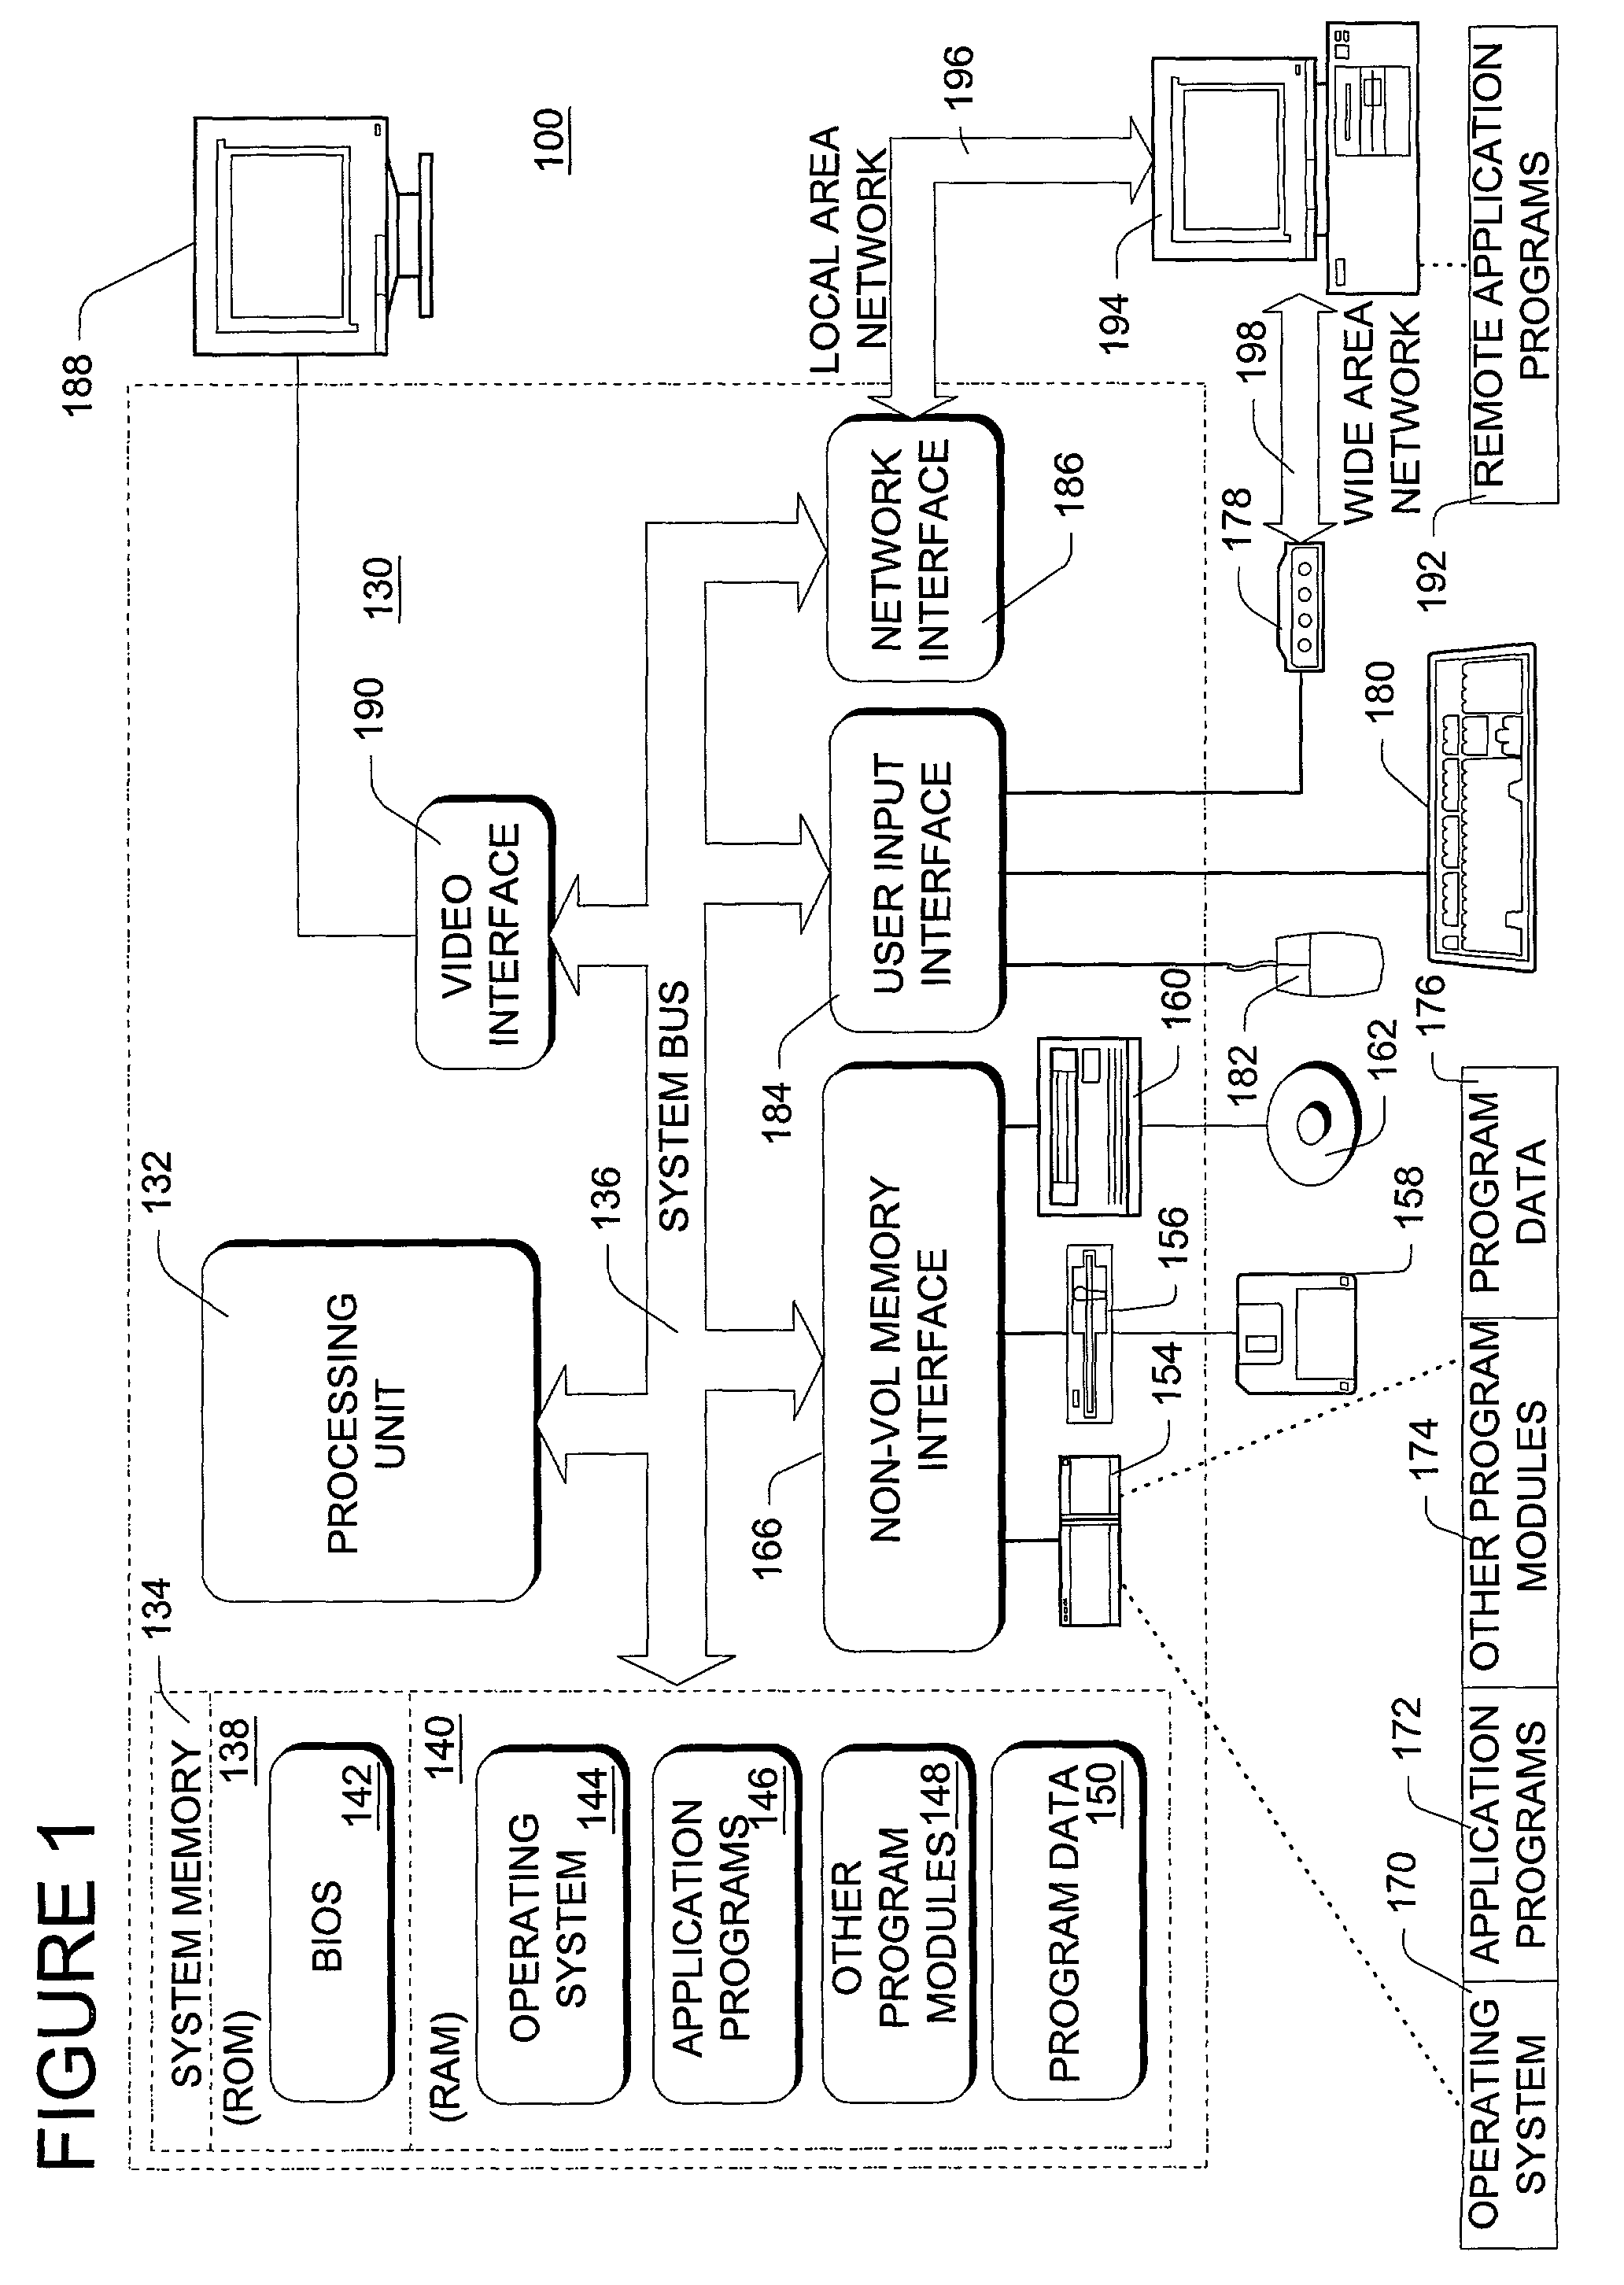 Distributed variable synchronizer